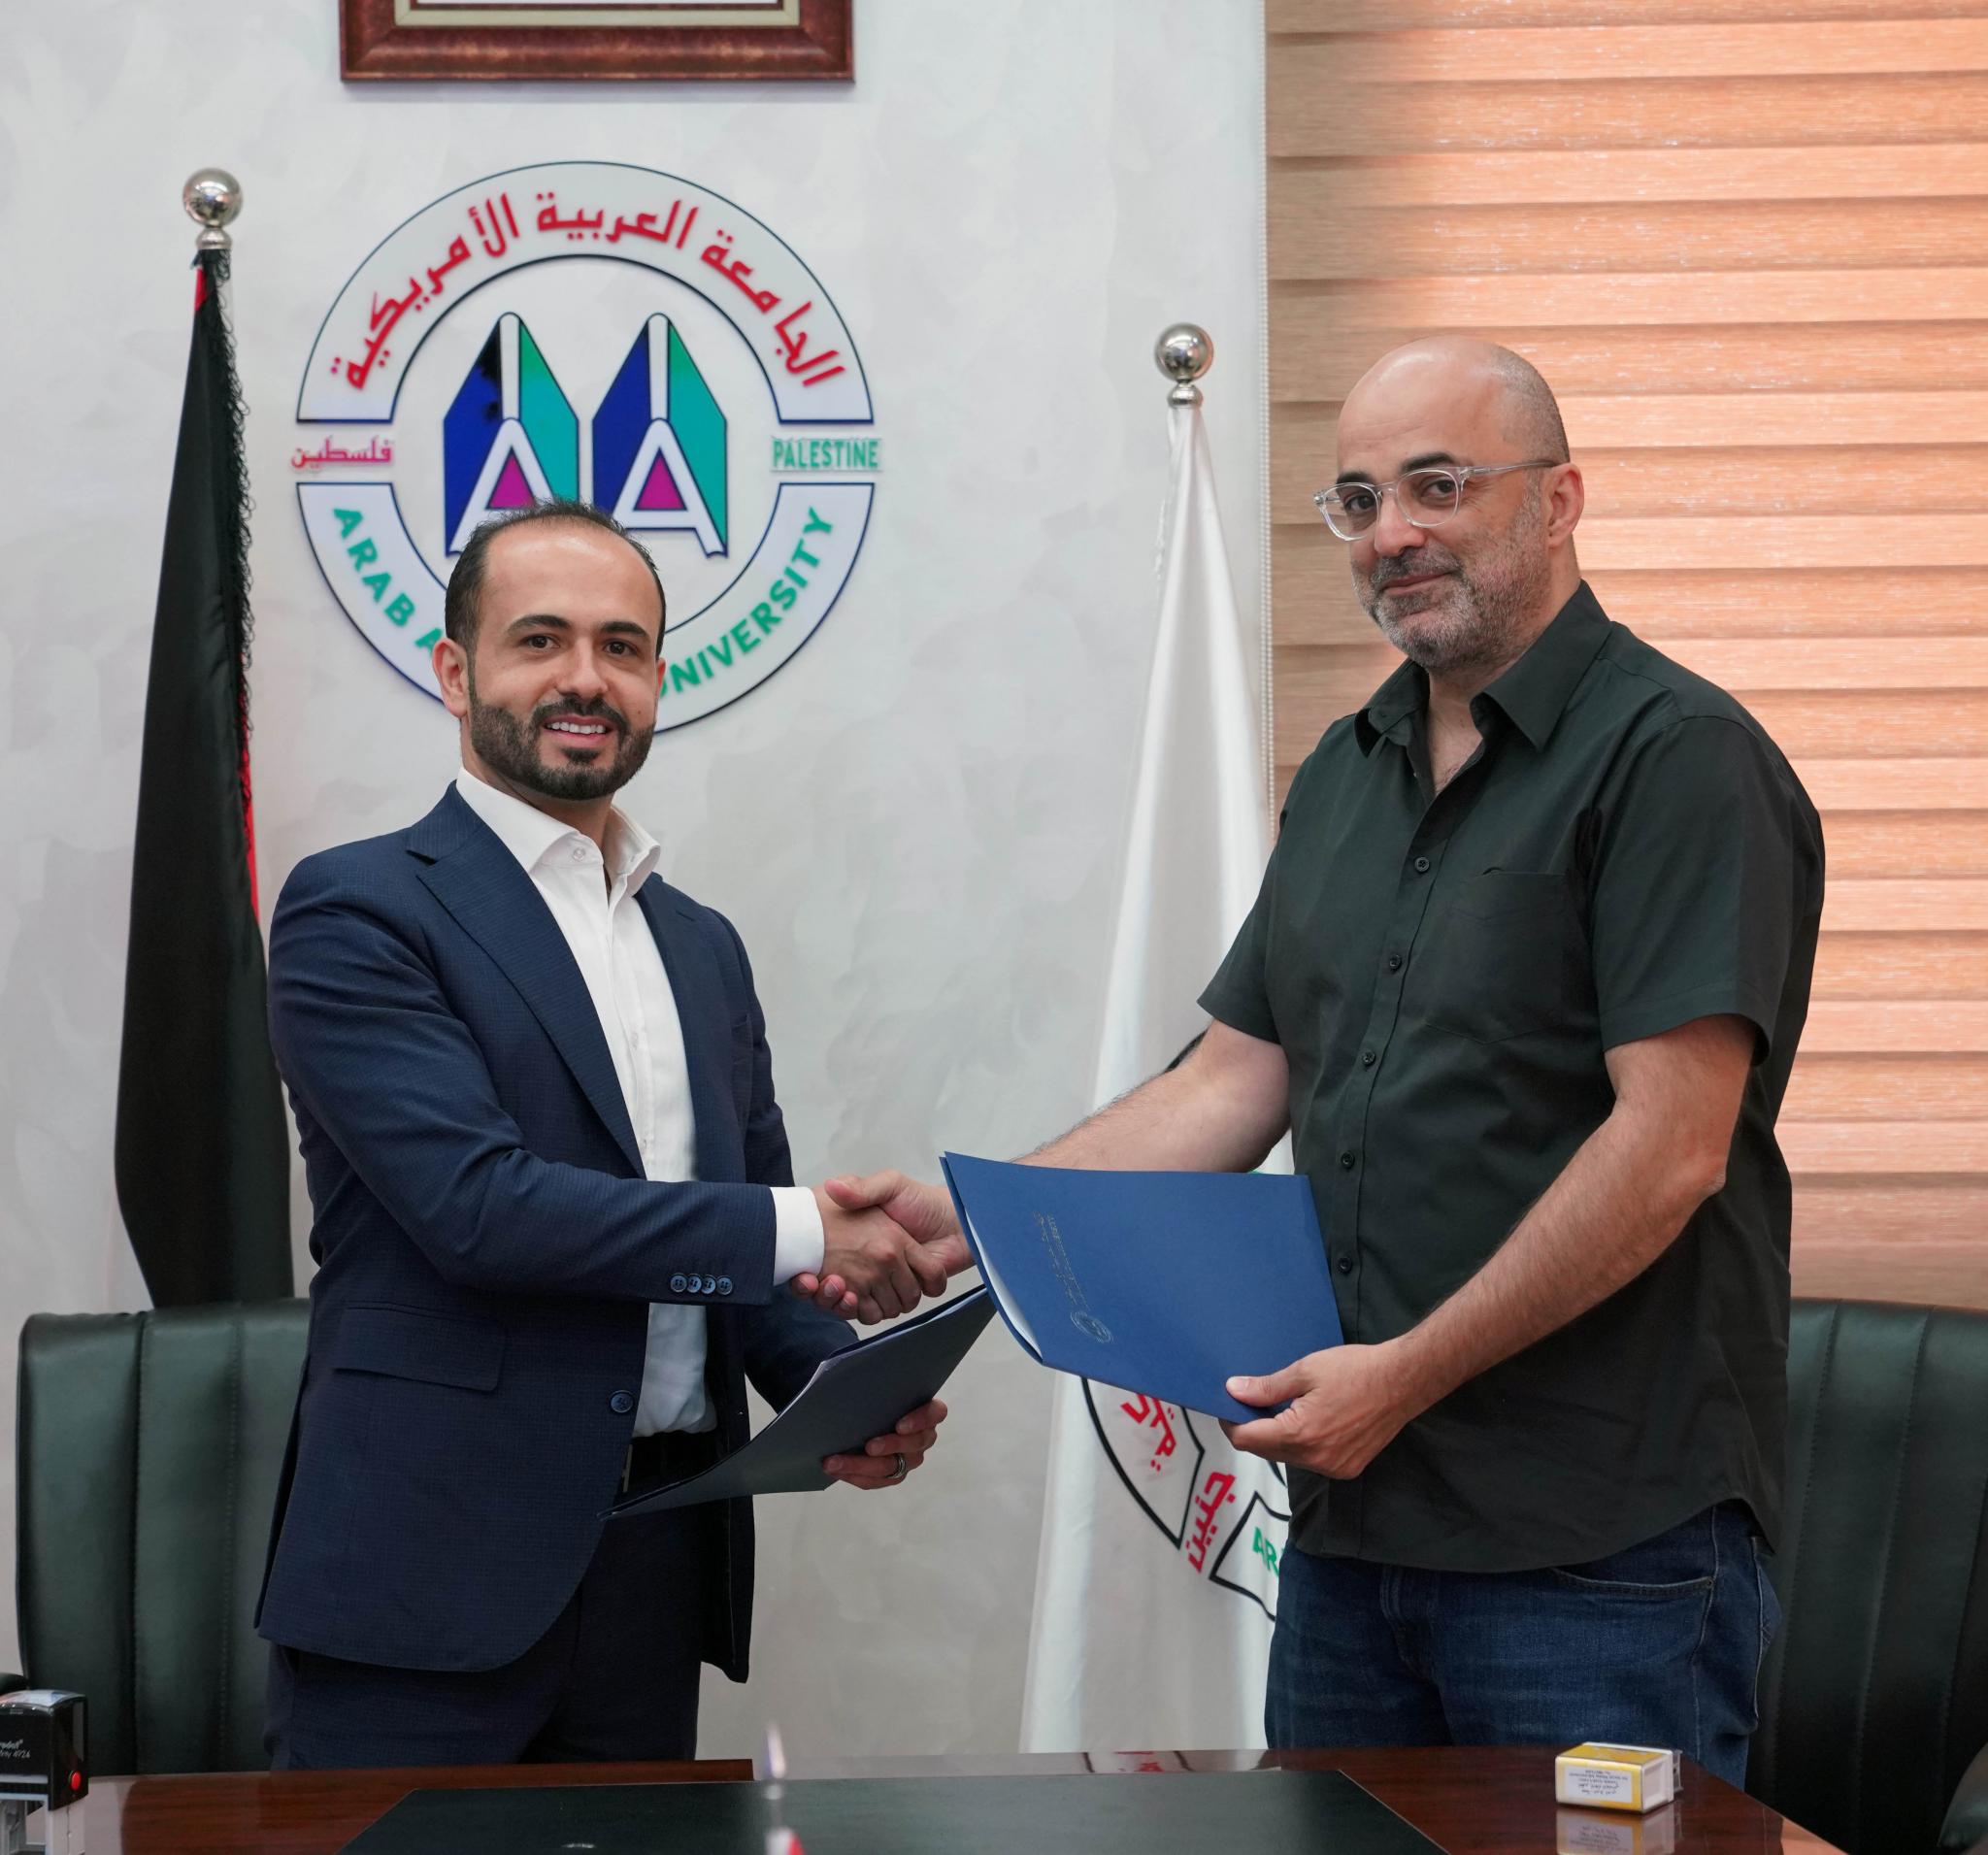 MoU Signing between AAUP and the Arab Center for the Advancement of Social Media